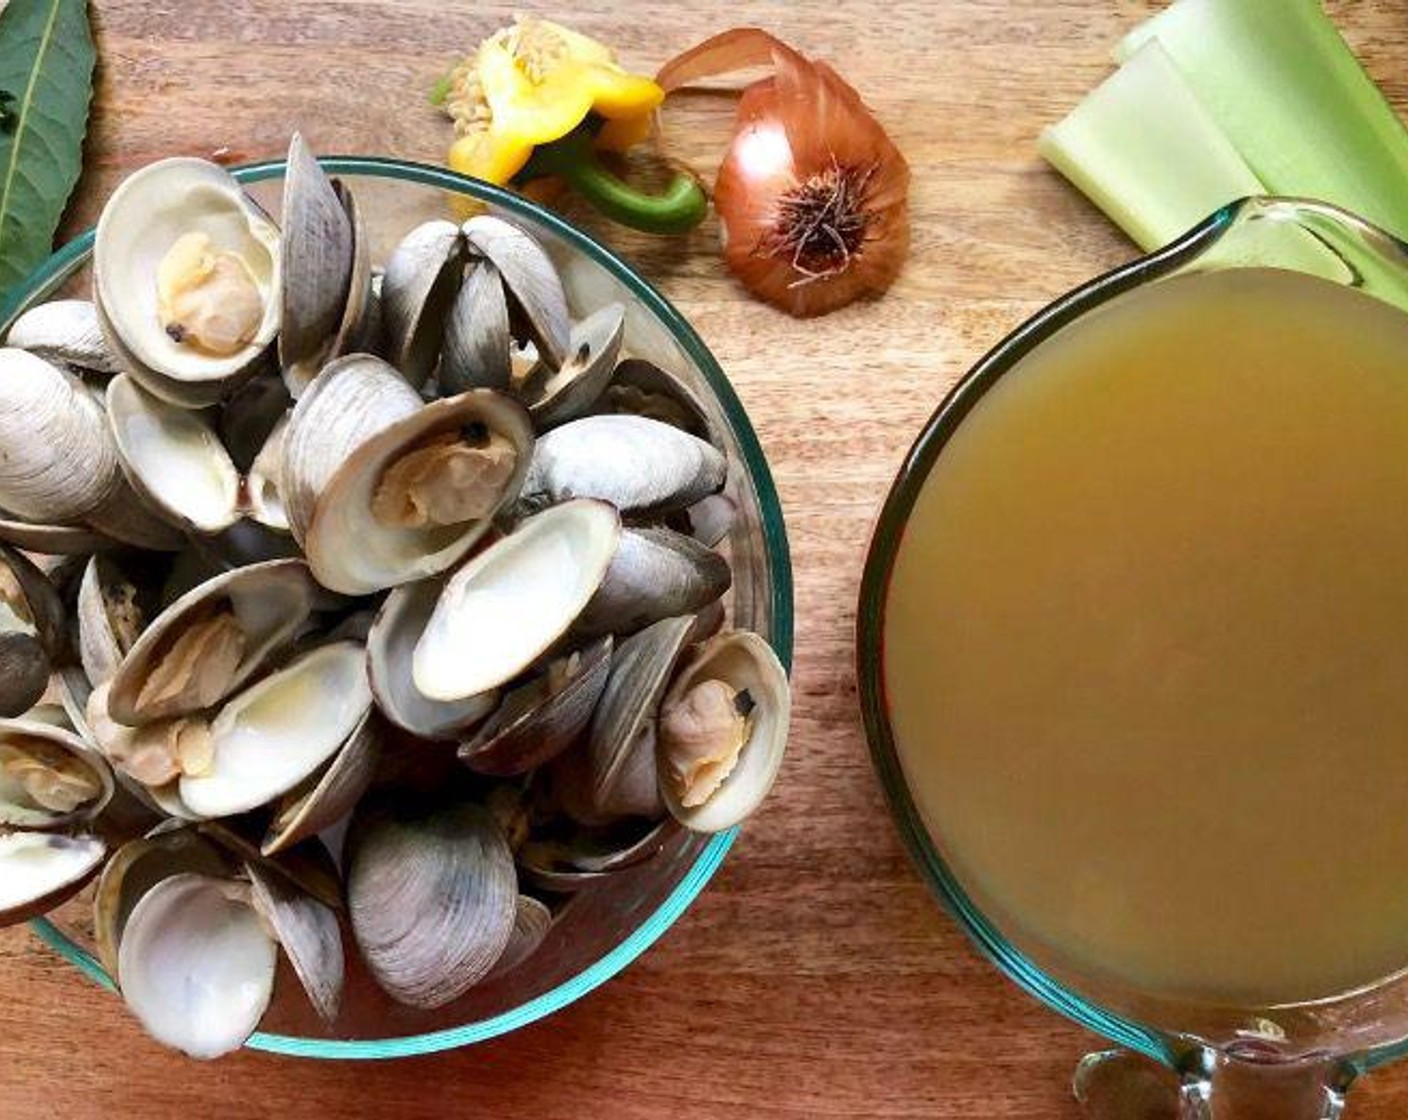 step 2 Toss any that stay closed. Use a slotted spoon to transfer the clams to a bowl and set aside. Strain the broth through a fine-mesh sieve into a heatproof bowl. Pour very slowly. If there is any remaining sand, it will linger at the bottom. Toss that and rinse the pot.